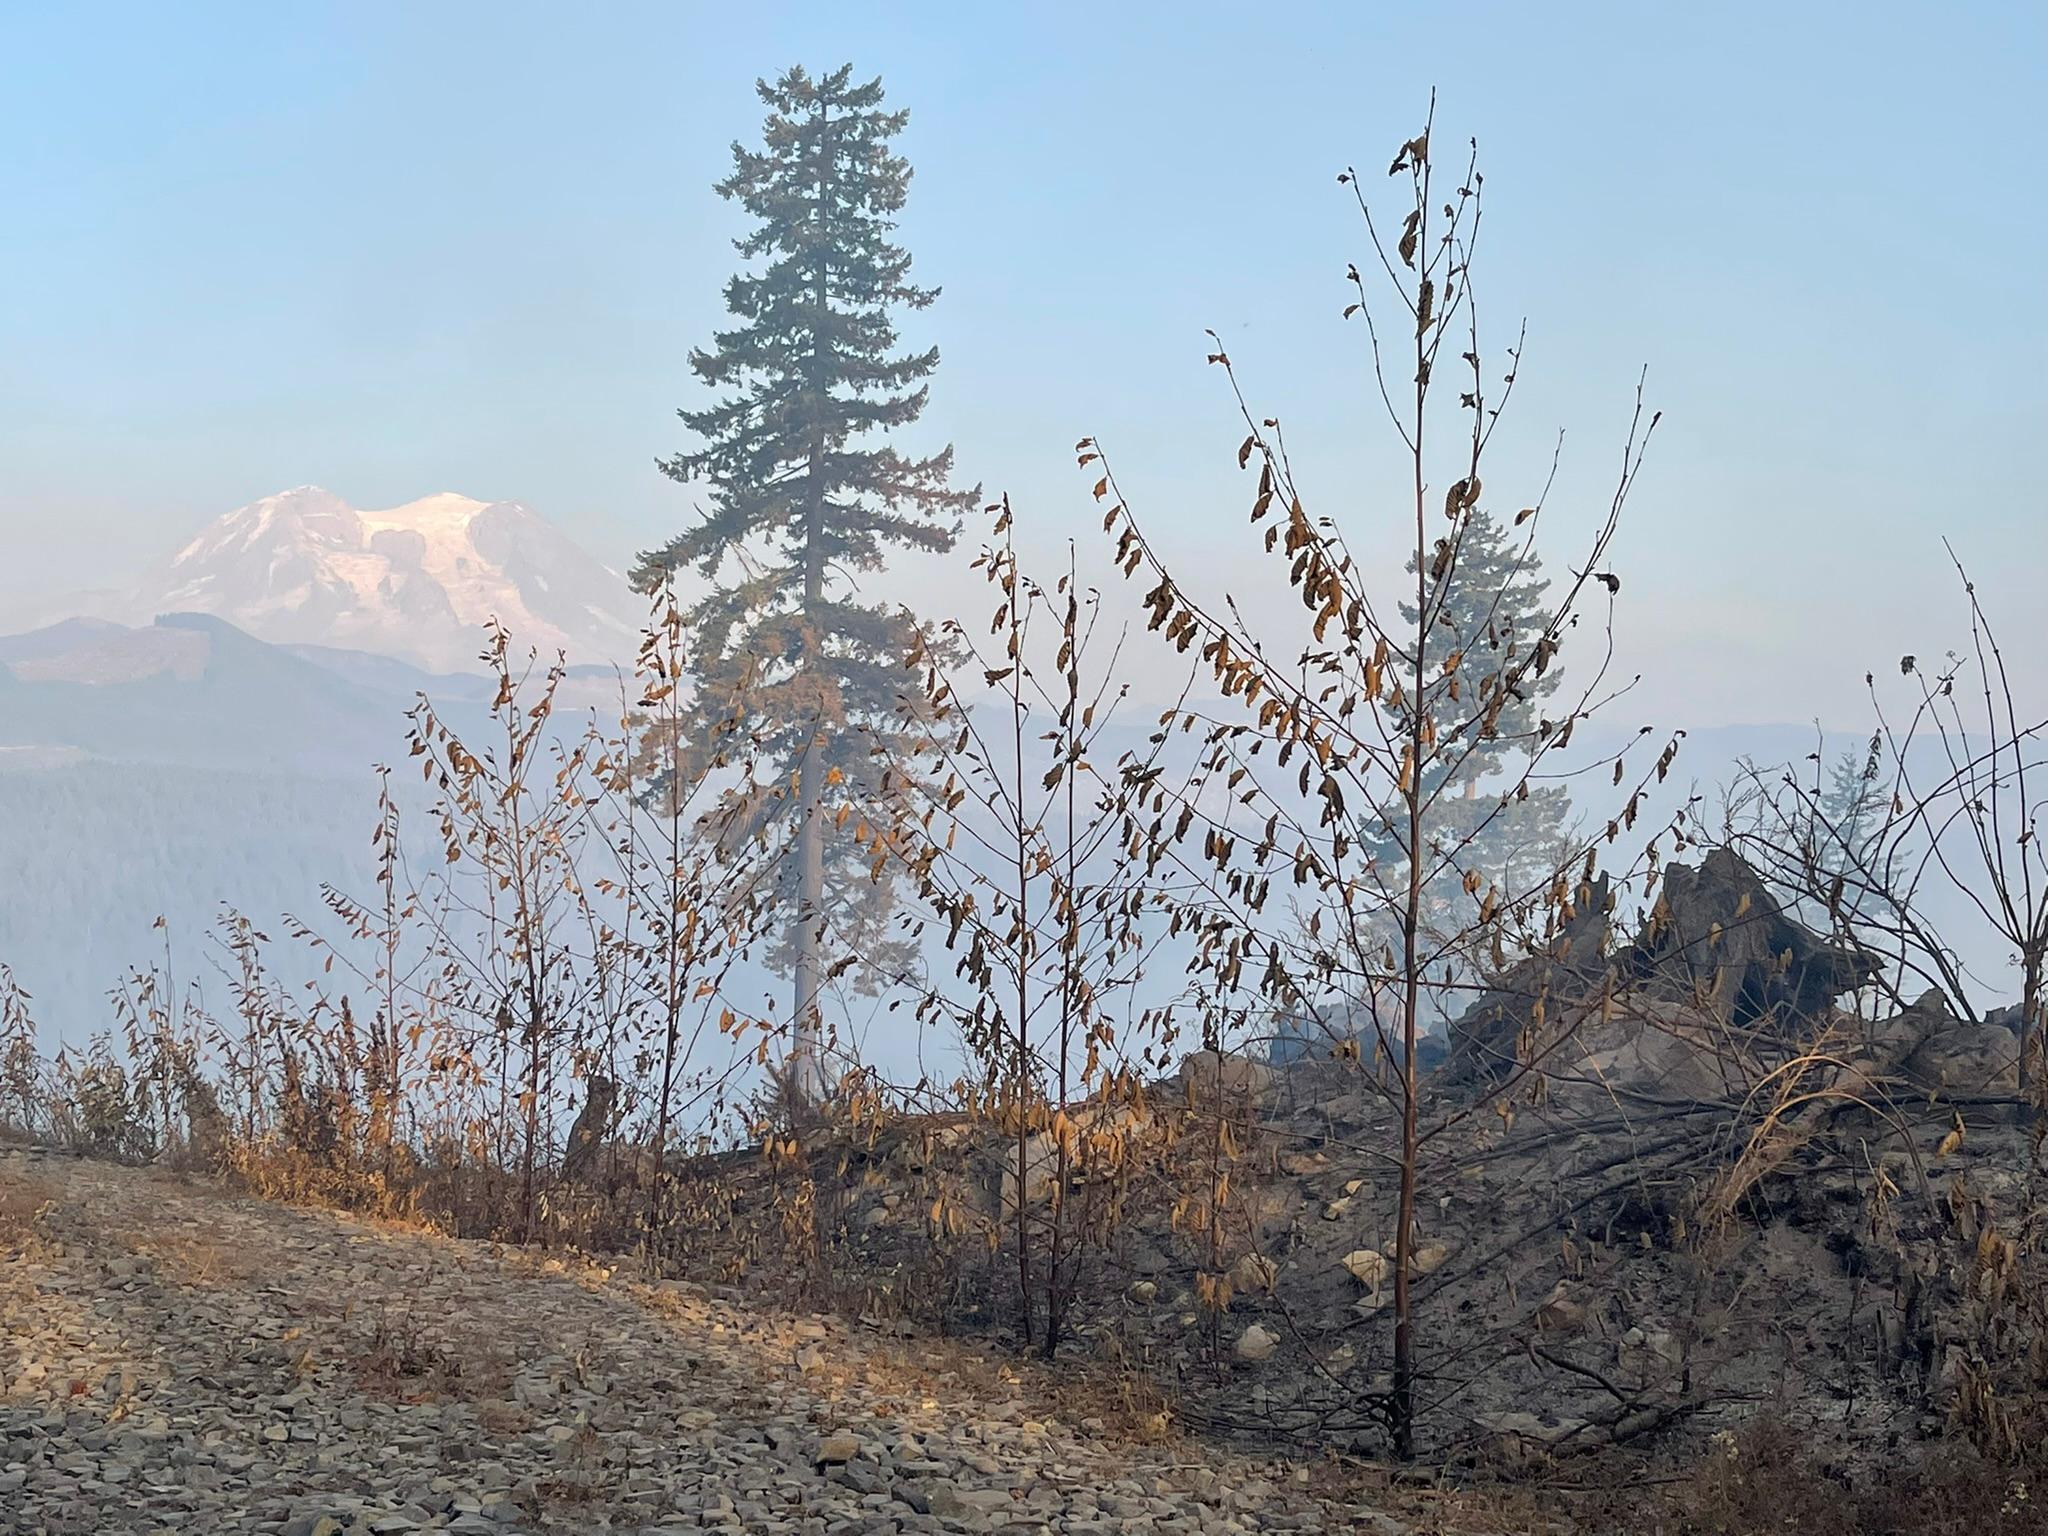 Mount Rainier seen in the distance through the smoke generated by the 8 Road Fire and other incidents